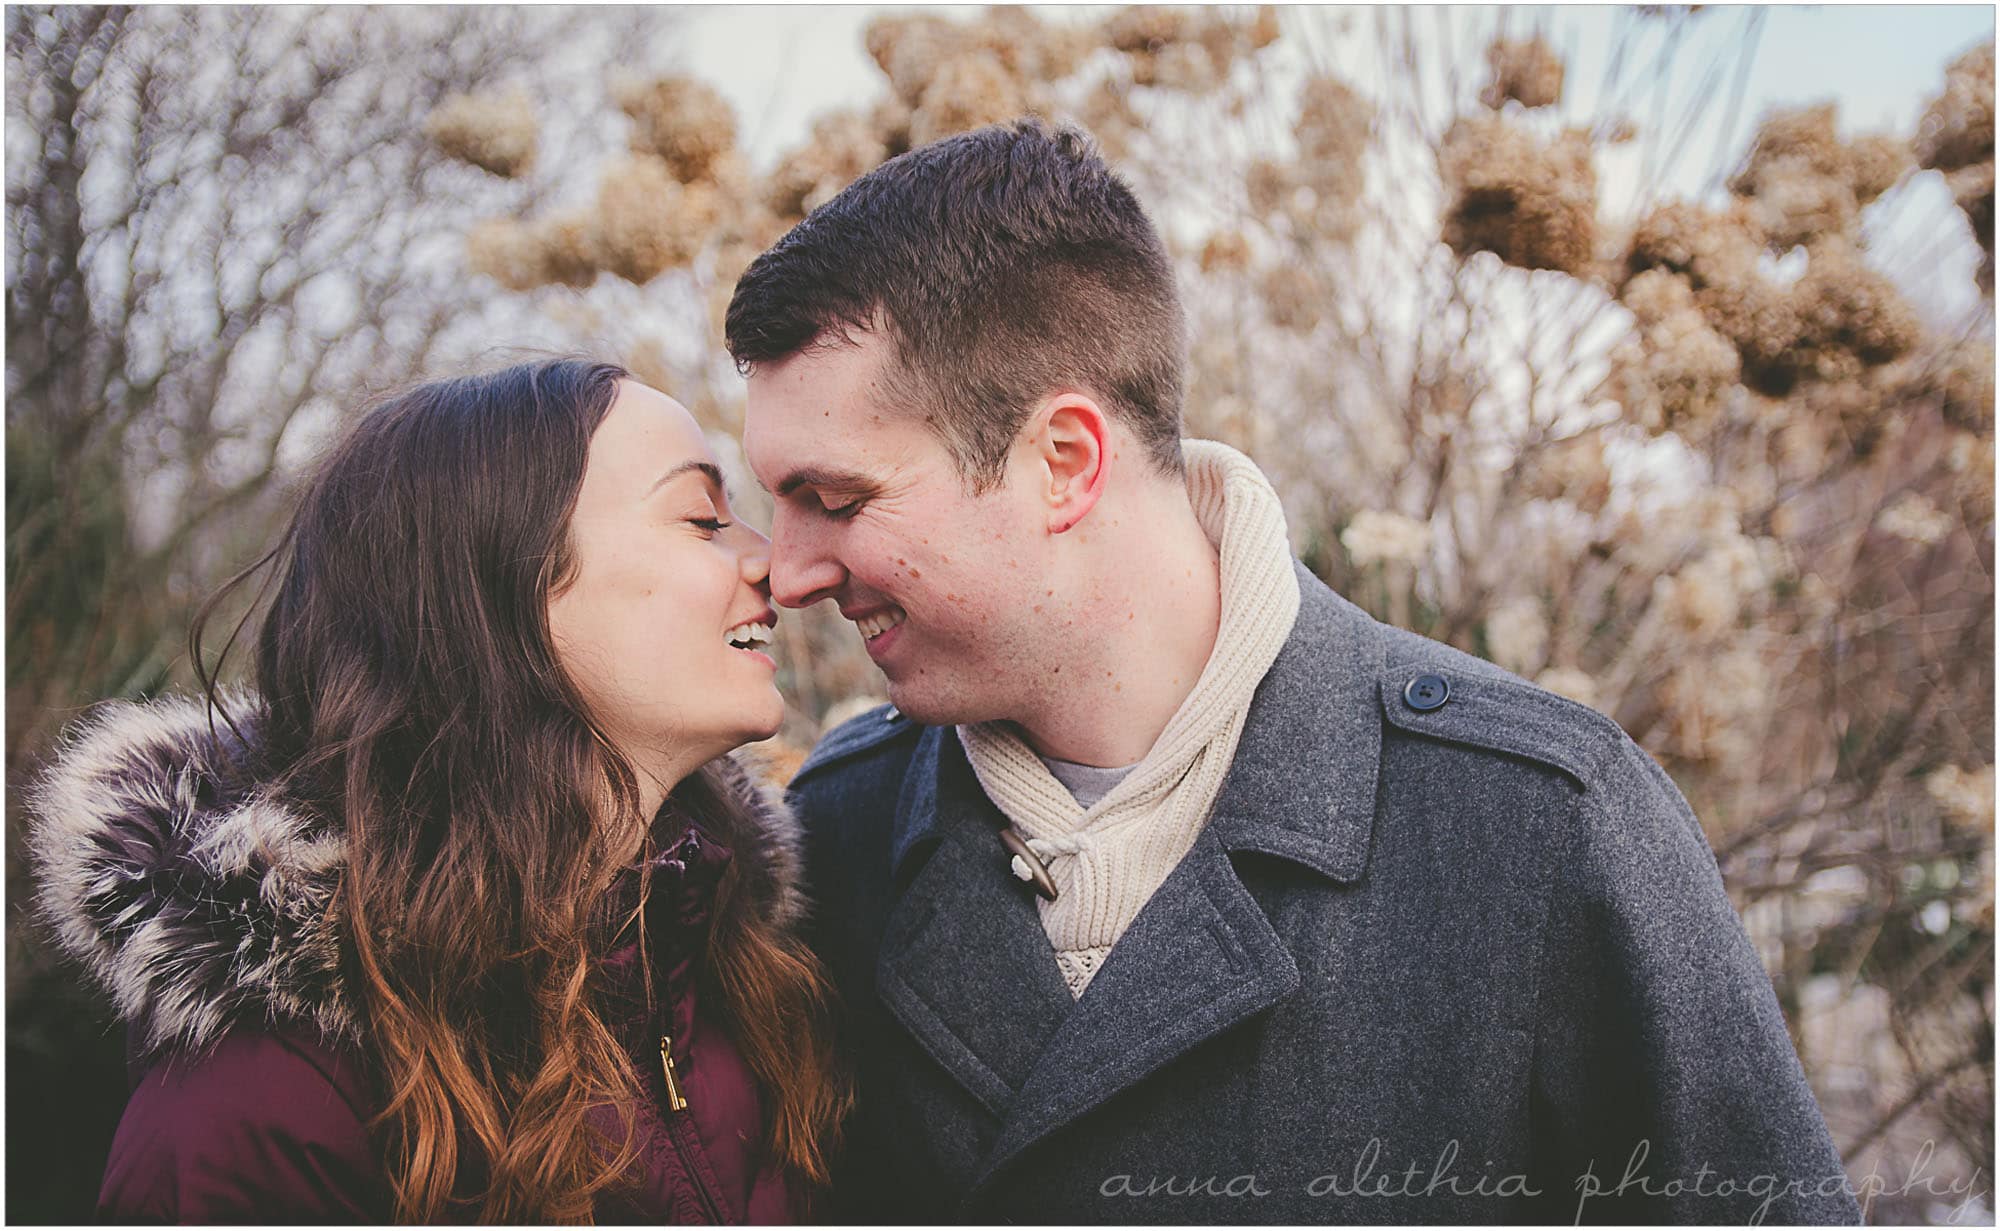 Engagement Photos at Olbrich Gardens Madison WI